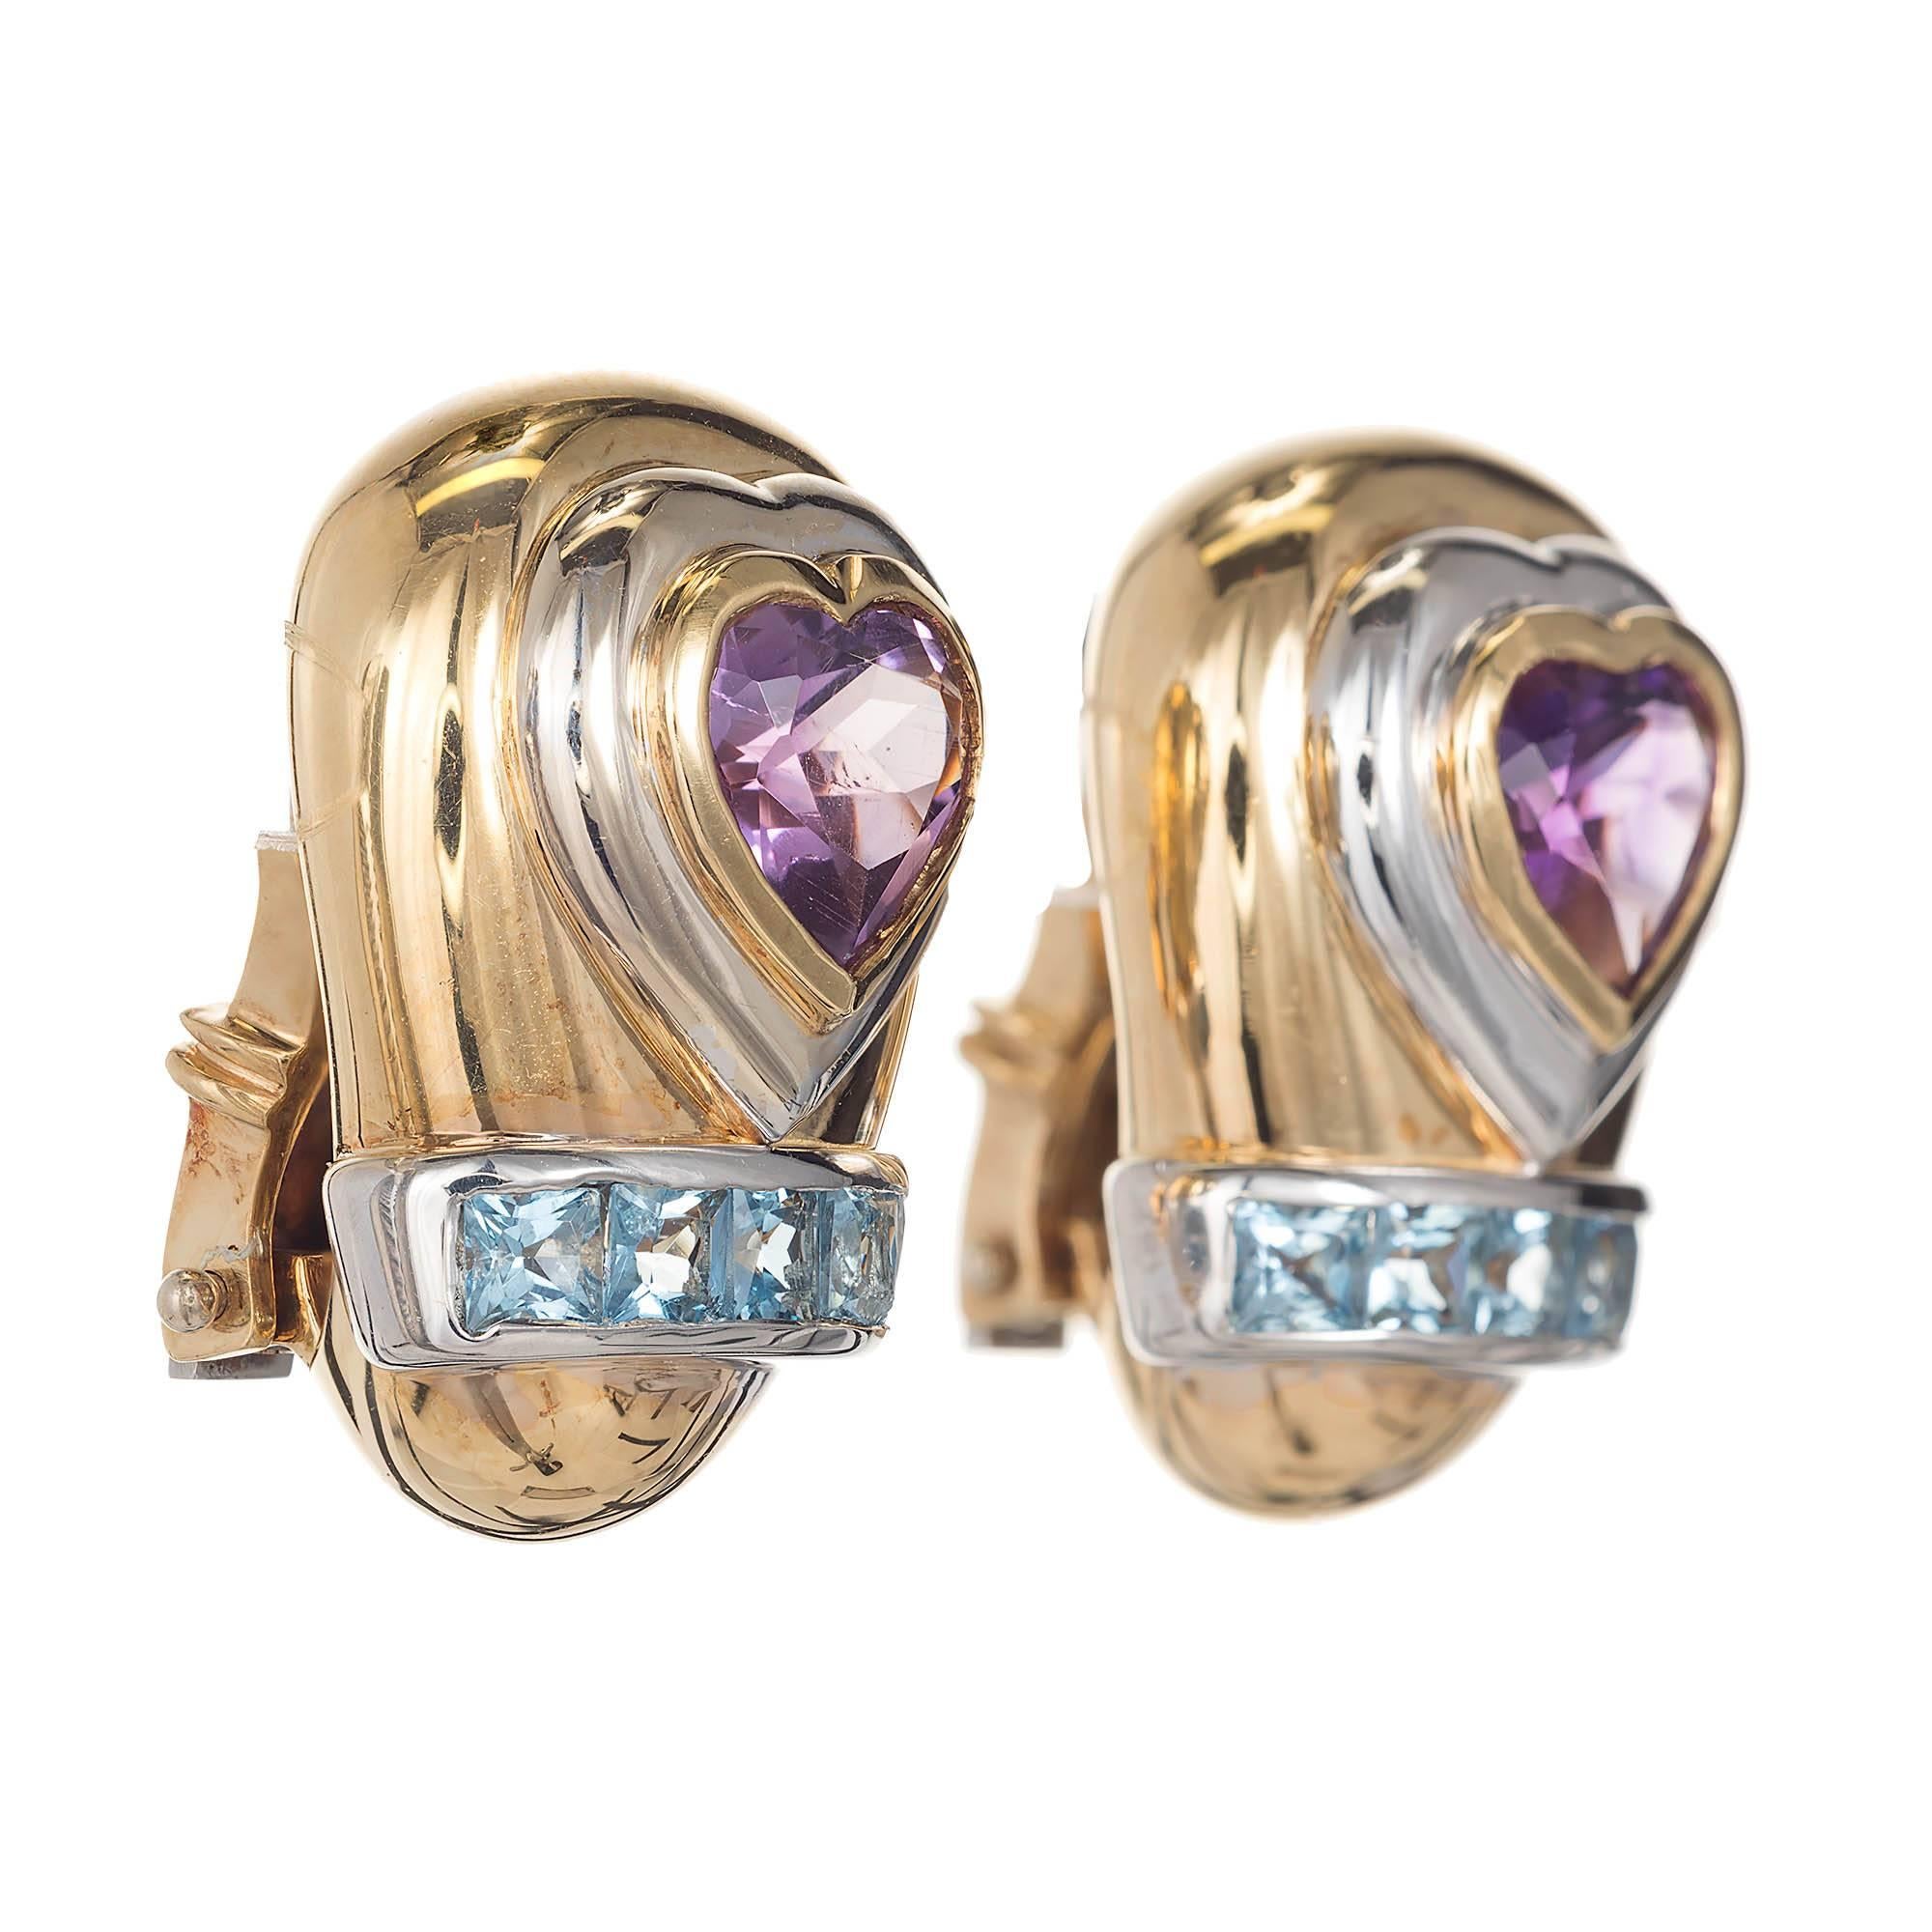 18k gold yellow and white gold Amethyst and Aqua, earrings by the designer Lilli. Extremely well made with heavy secure clips post. Natural untreated square cut Aquamarines in a white gold channel and stunning deep vibrant purple Amethyst on the